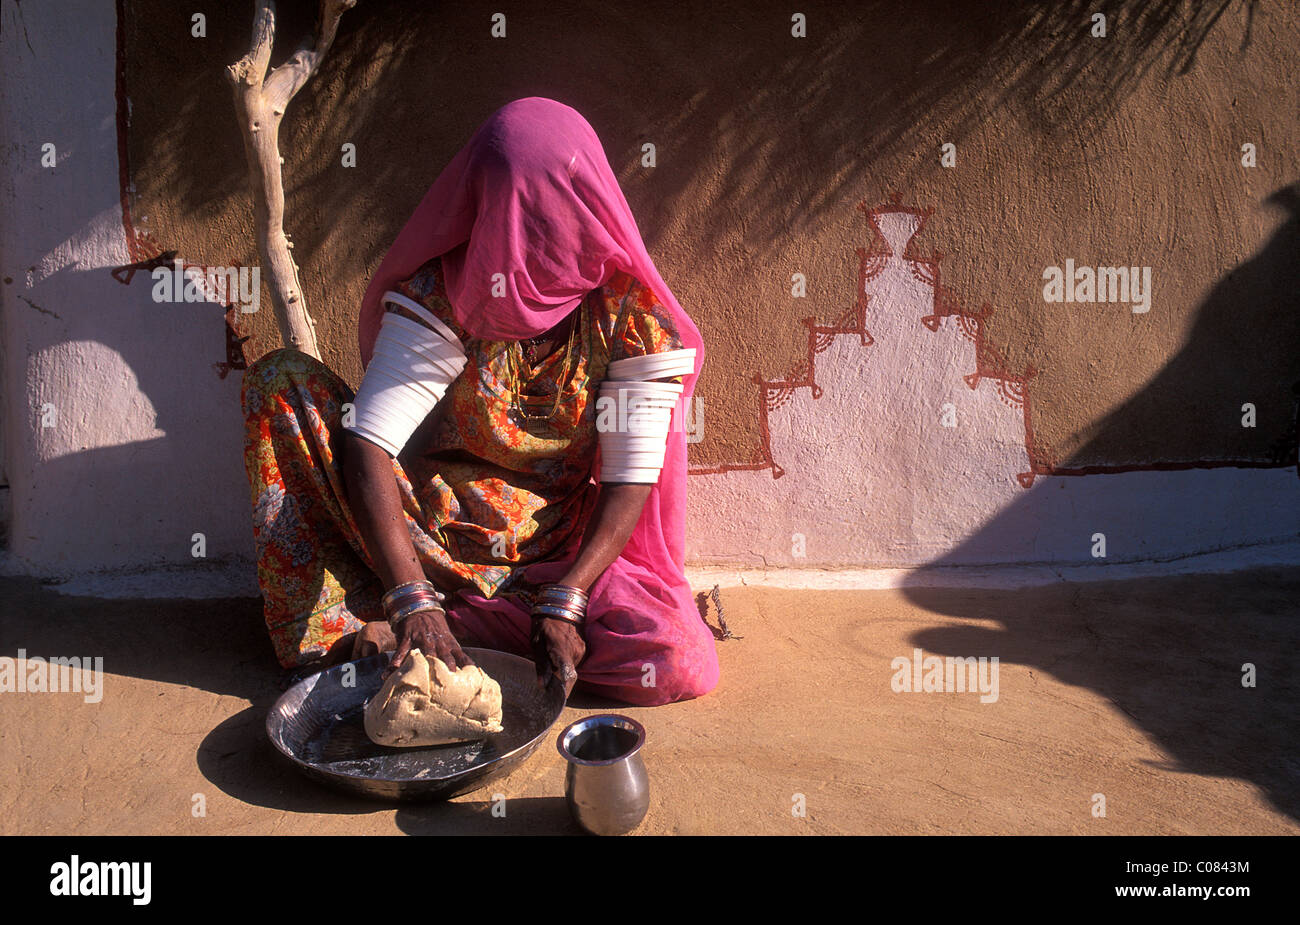 Young Indian woman in sari kneads dough for chapati bread, Thar Desert, Rajasthan, India, Asia Stock Photo